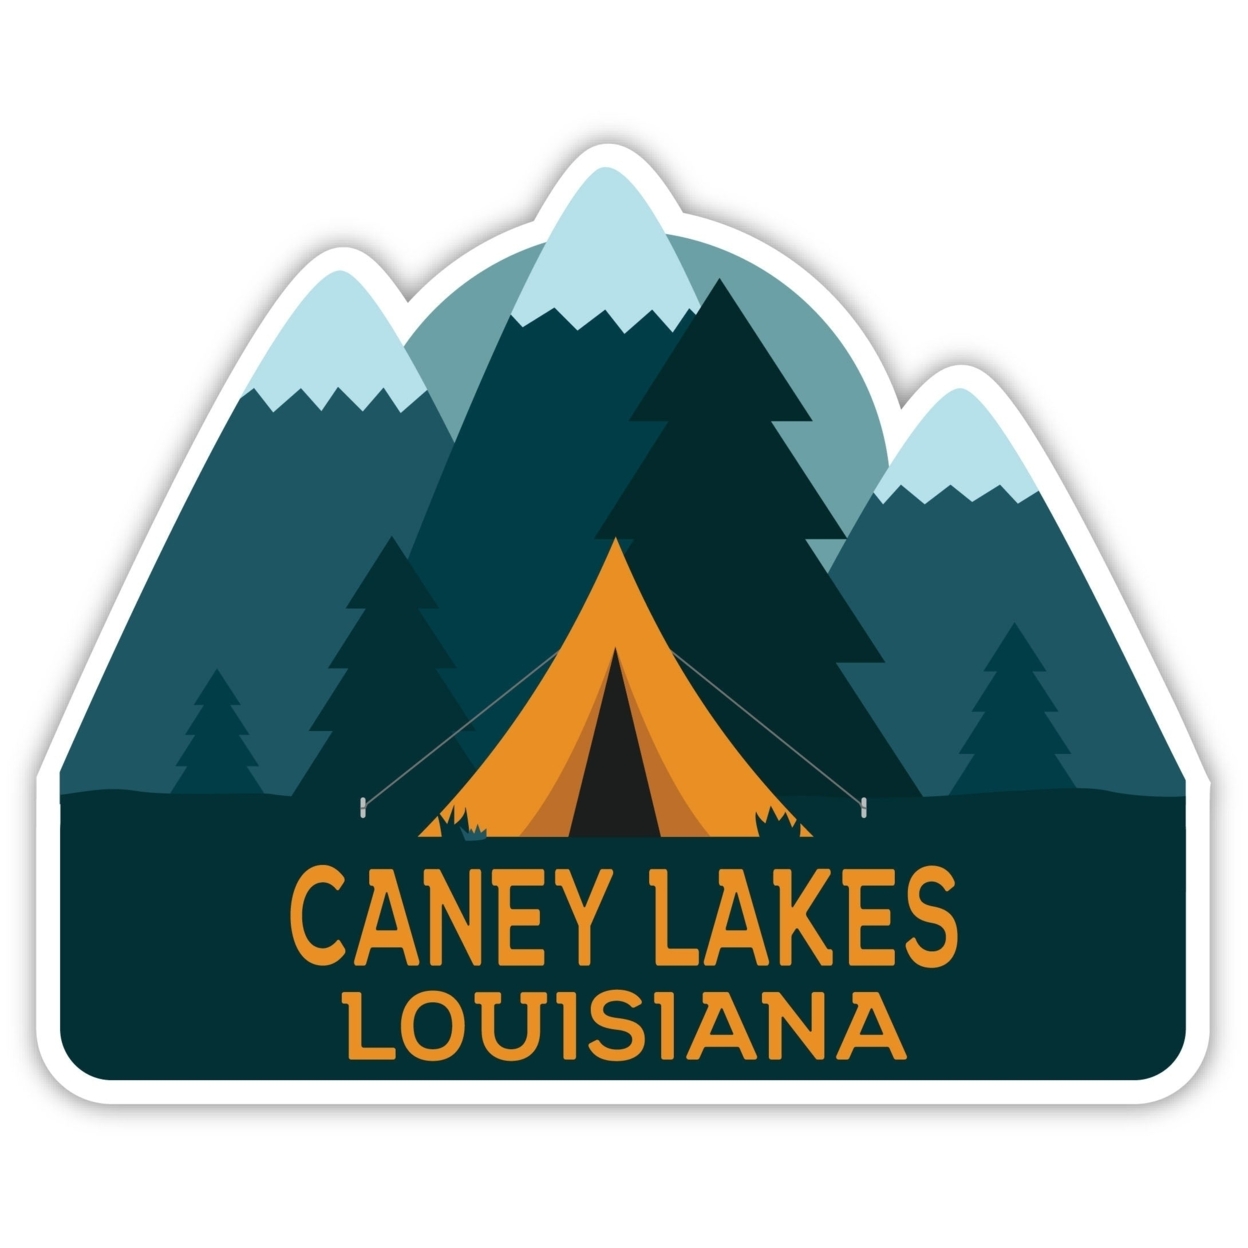 Caney Lakes Louisiana Souvenir Decorative Stickers (Choose Theme And Size) - 4-Pack, 12-Inch, Tent